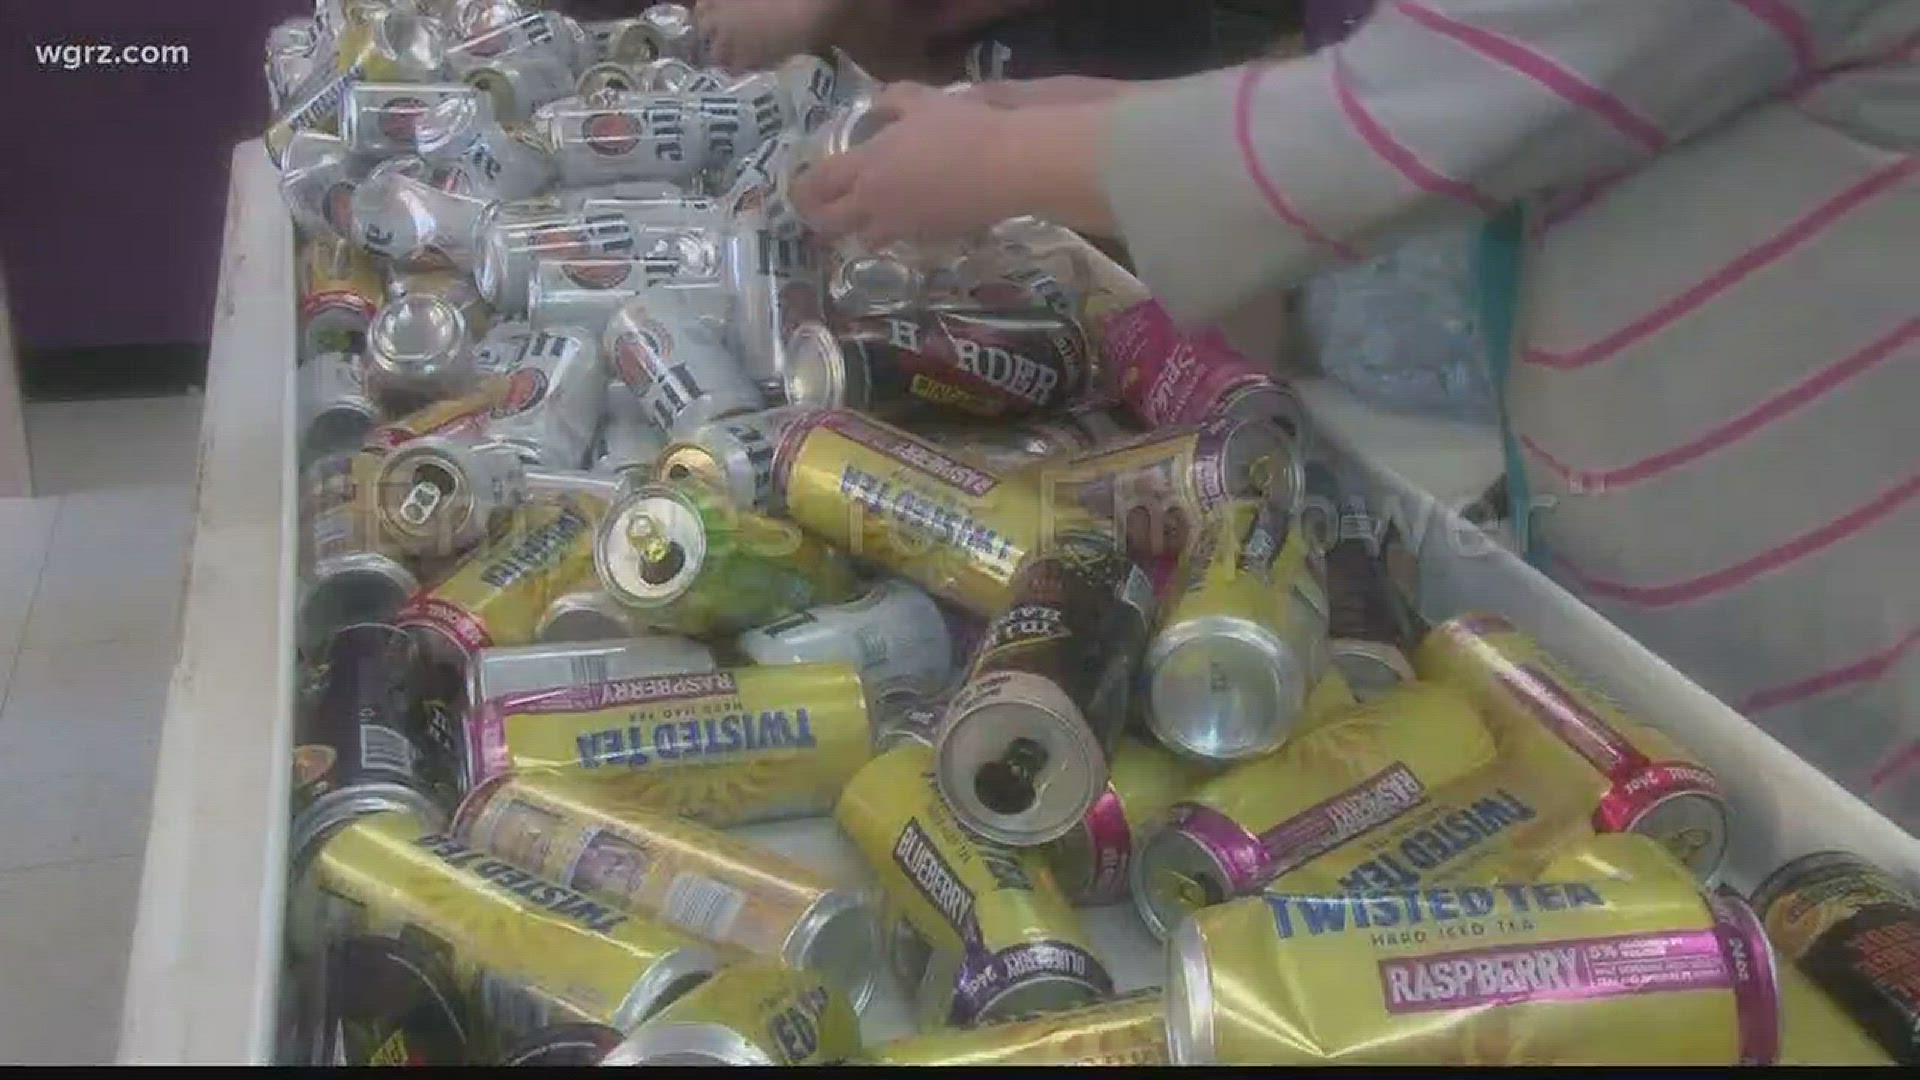 They say one man's trash is another man's treasure. Well an organization in Niagara County is proving that using empty bottles and cans to benefit people with disabilities.